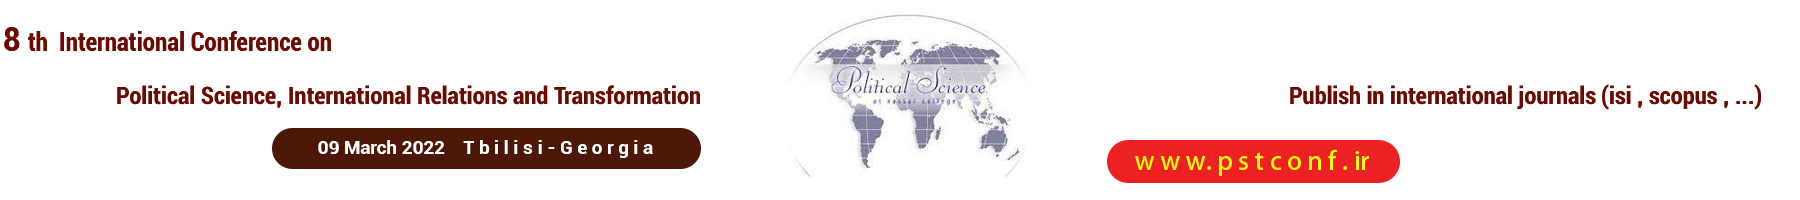 International Conference on Political Science, International Relations and Transformation	